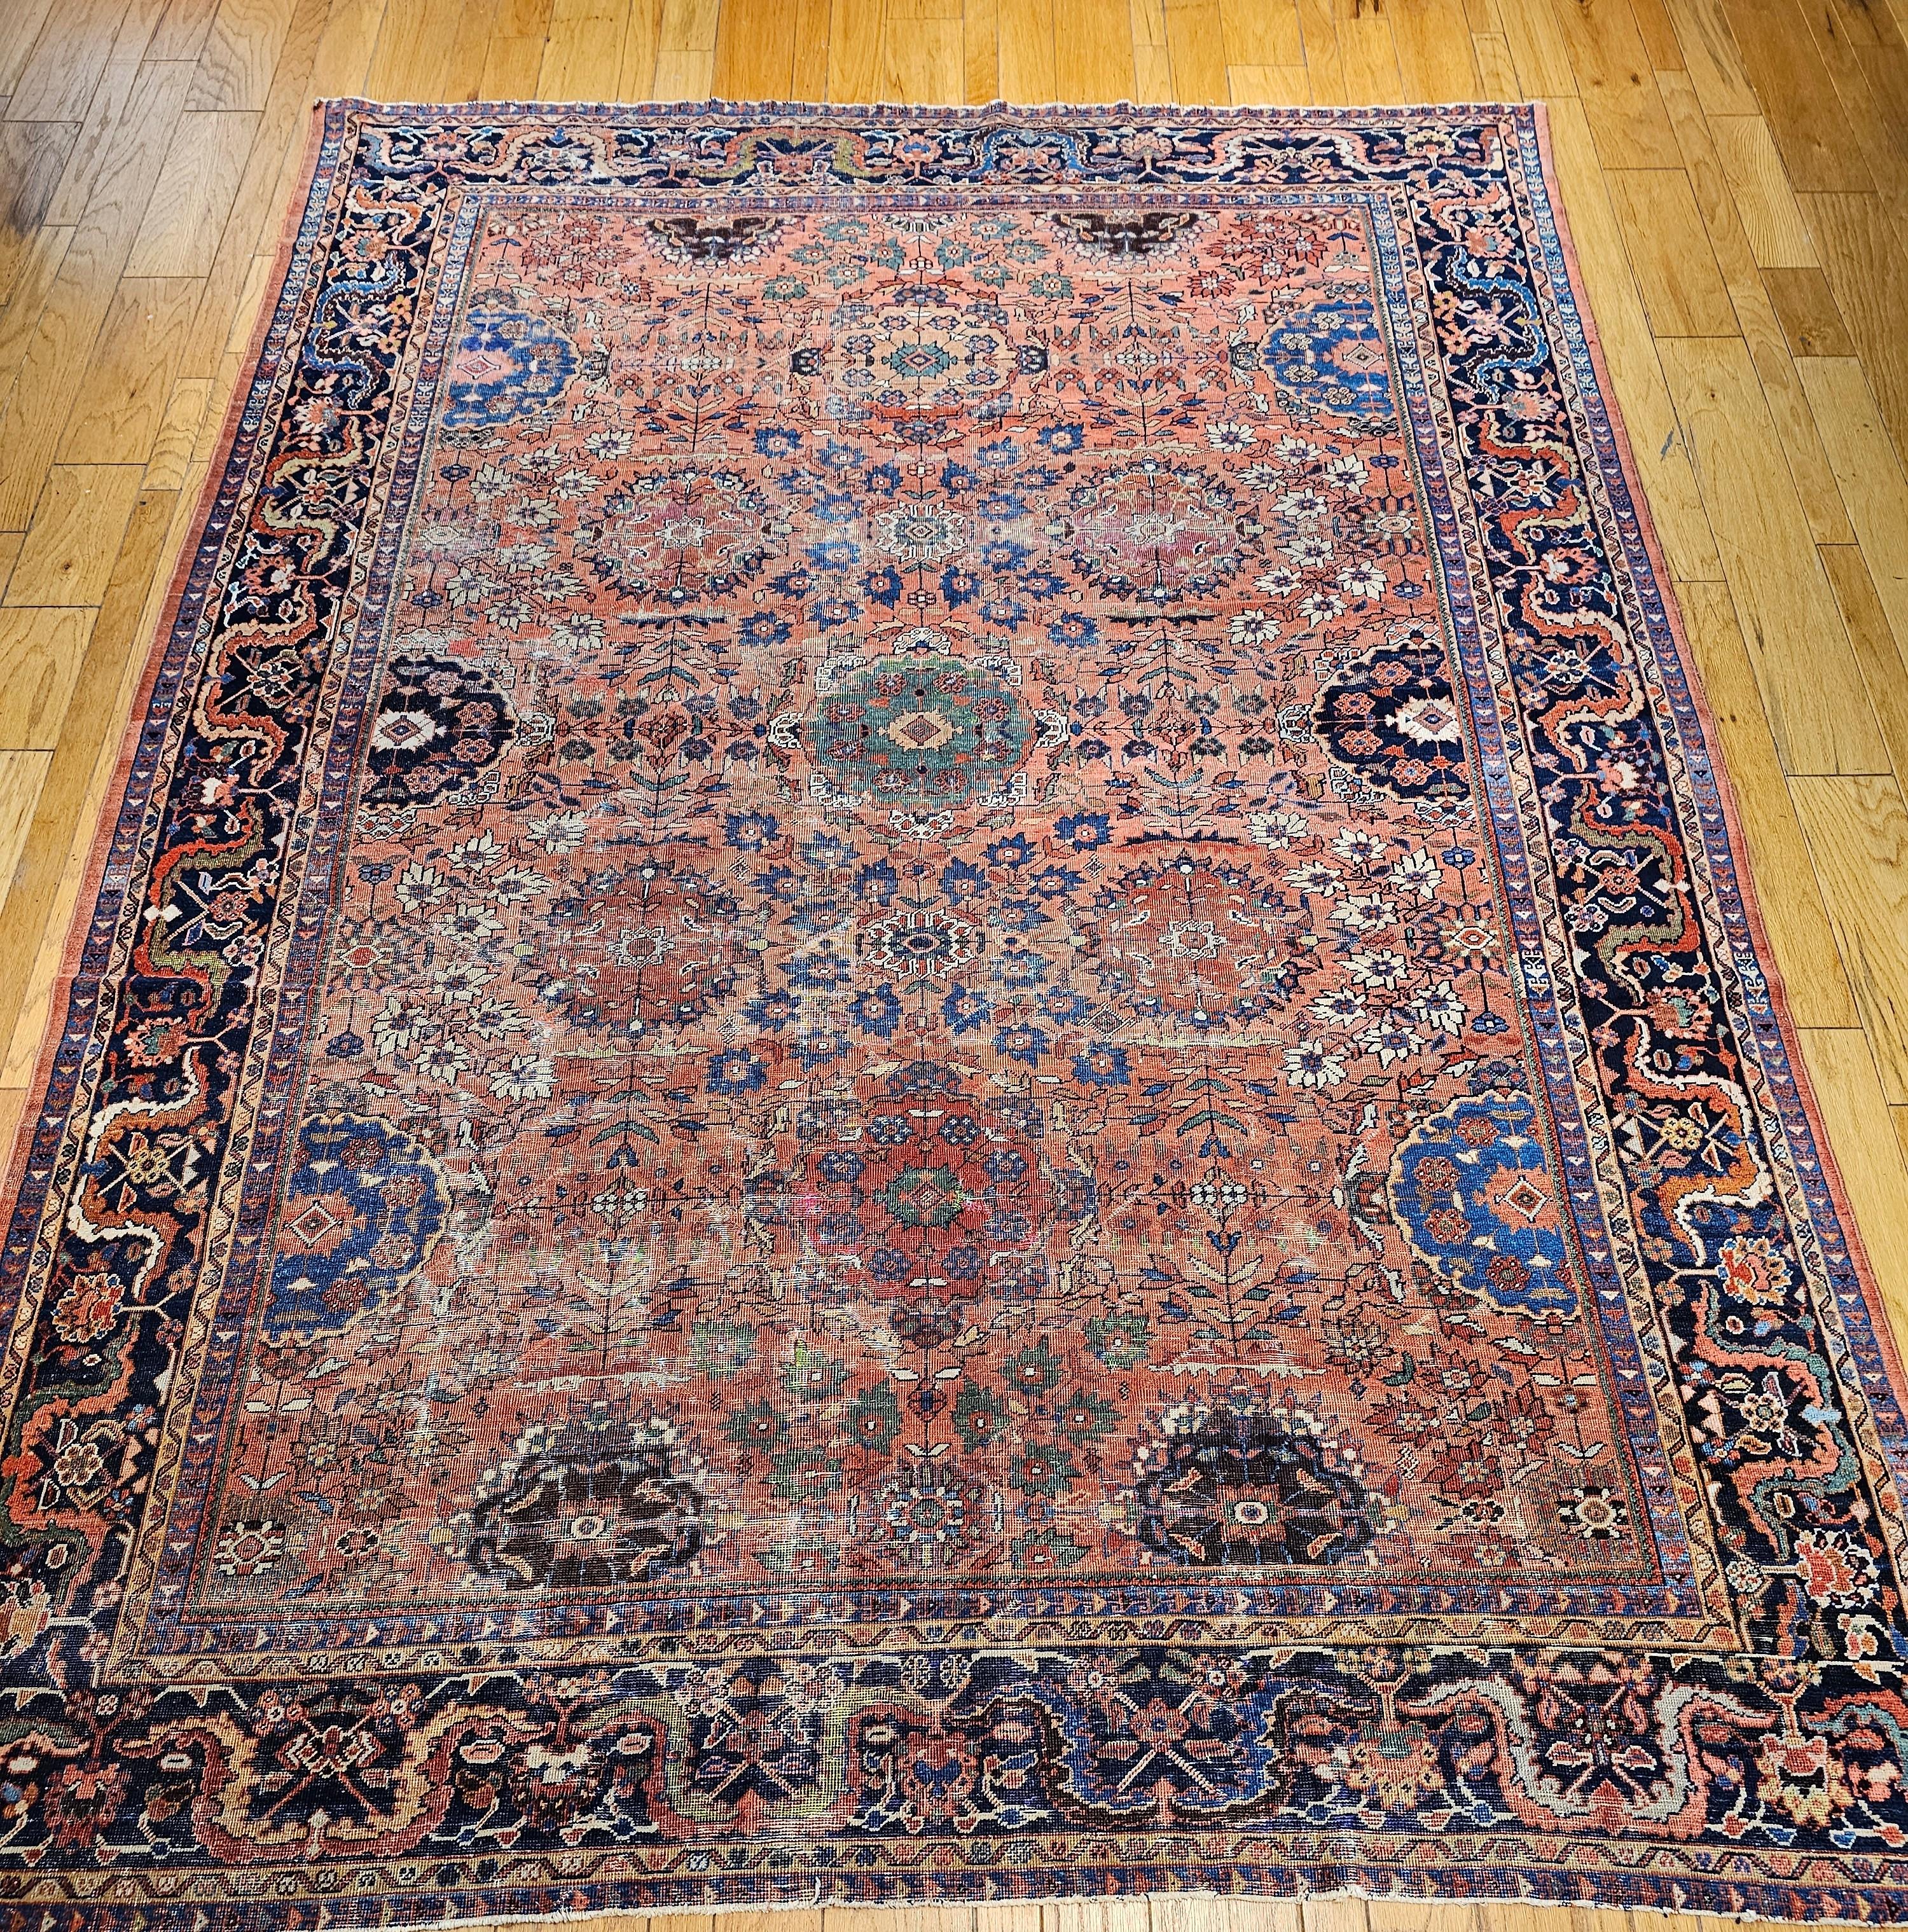 Vintage Persian Mahal Sultanabad Room Size Rug in Brick Red, Navy Blue 4